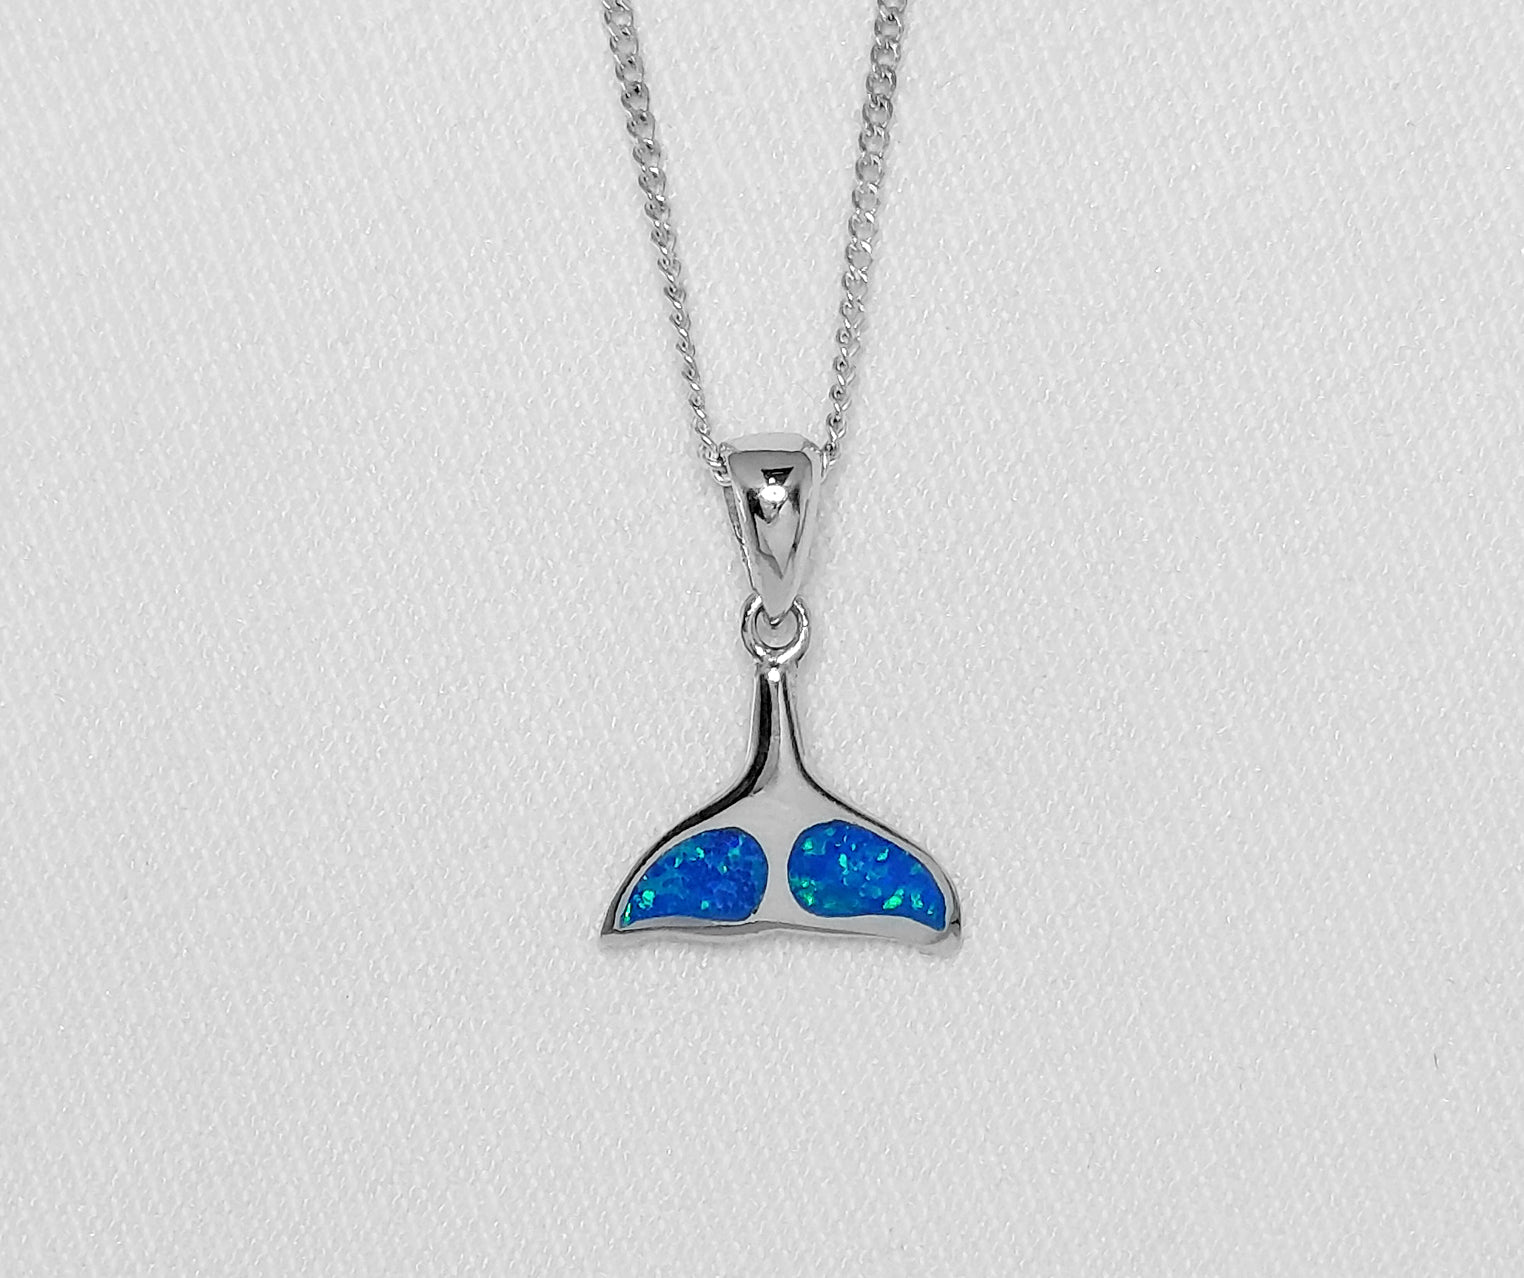 Sterling Silver Whale Tail Pendant With Crushed Opal Inlay